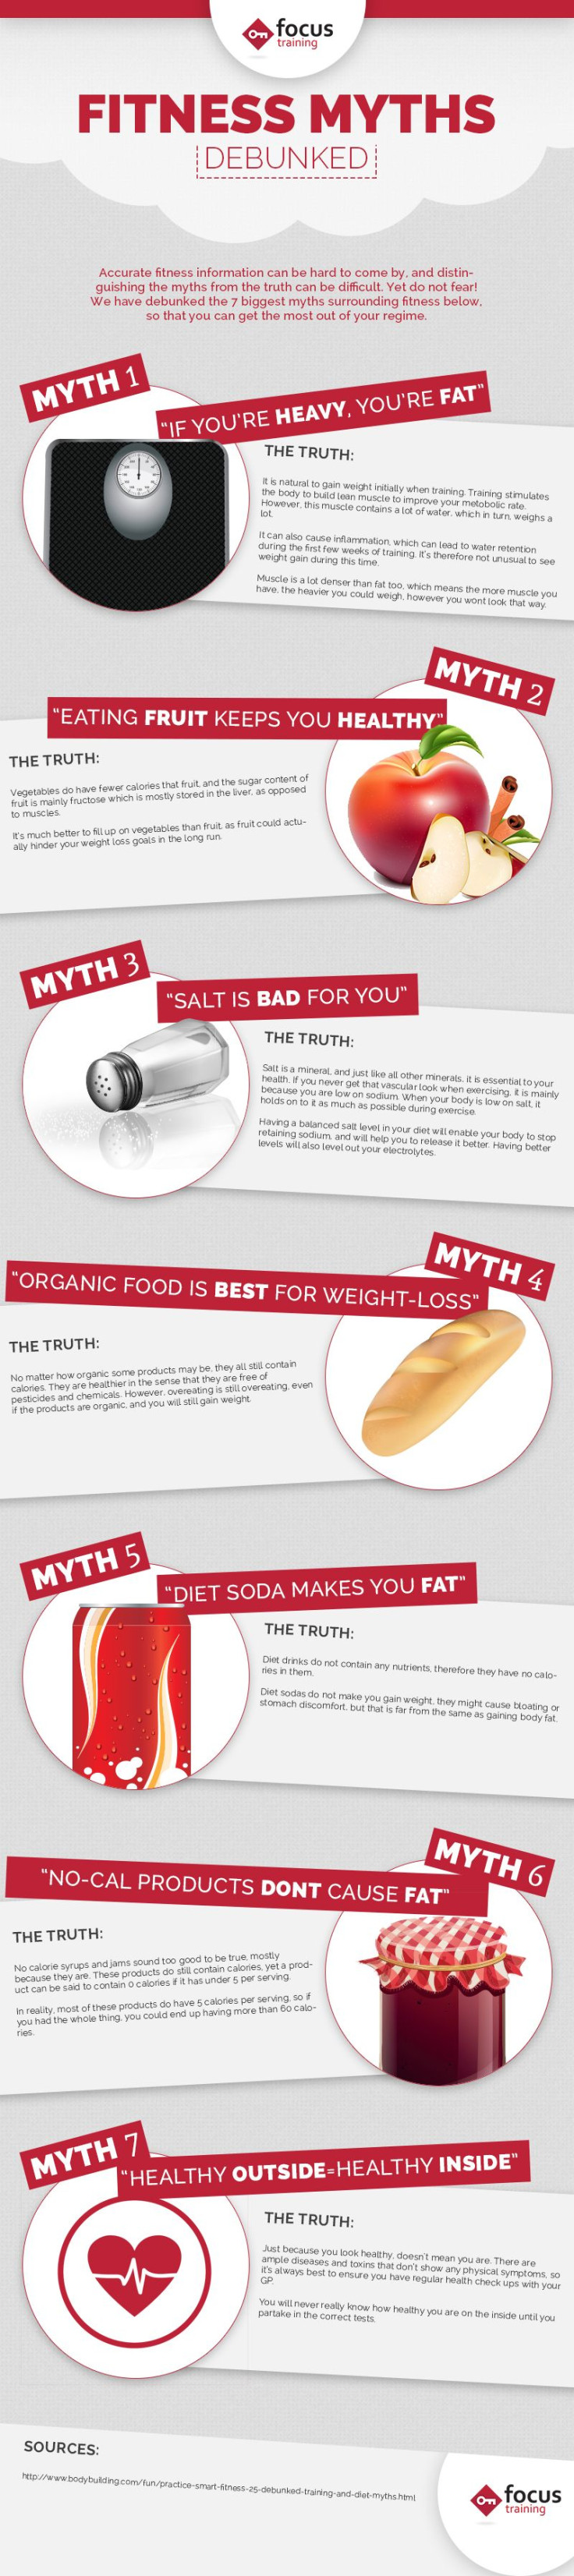 Fitness Myths Debunked #infographic